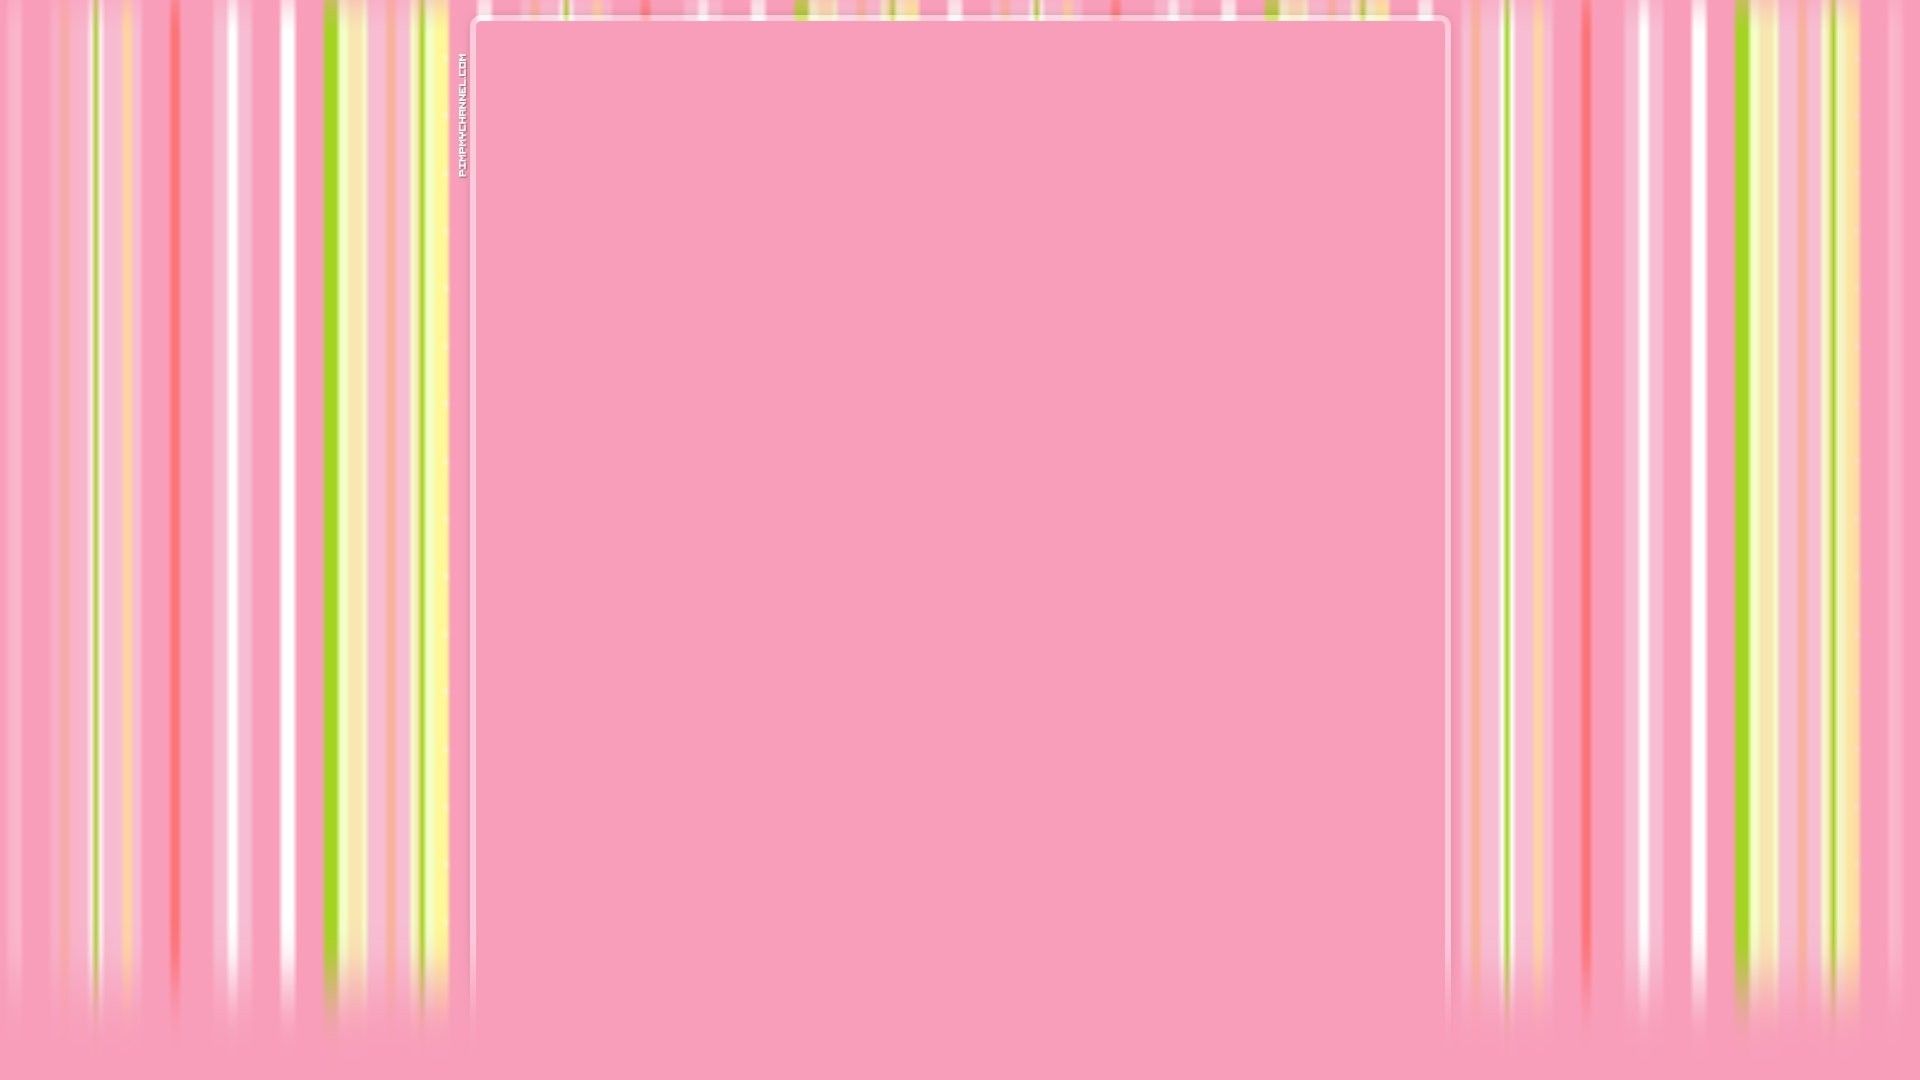 A pink background with a green and white striped border - YouTube